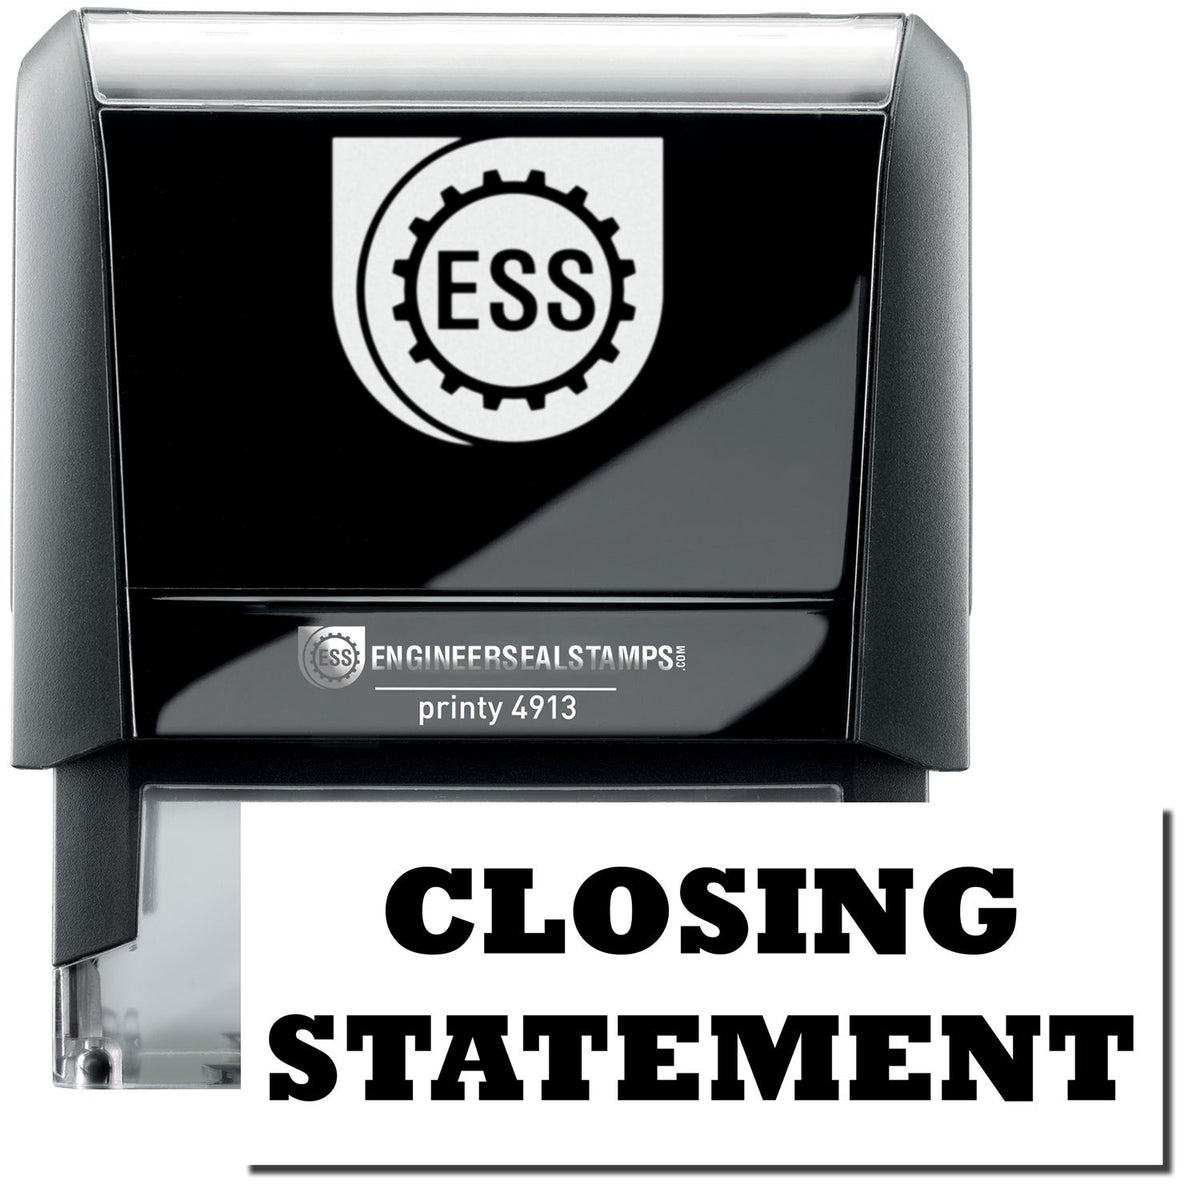 A self-inking stamp with a stamped image showing how the text &quot;CLOSING STATEMENT&quot; in a large bold font is displayed by it.